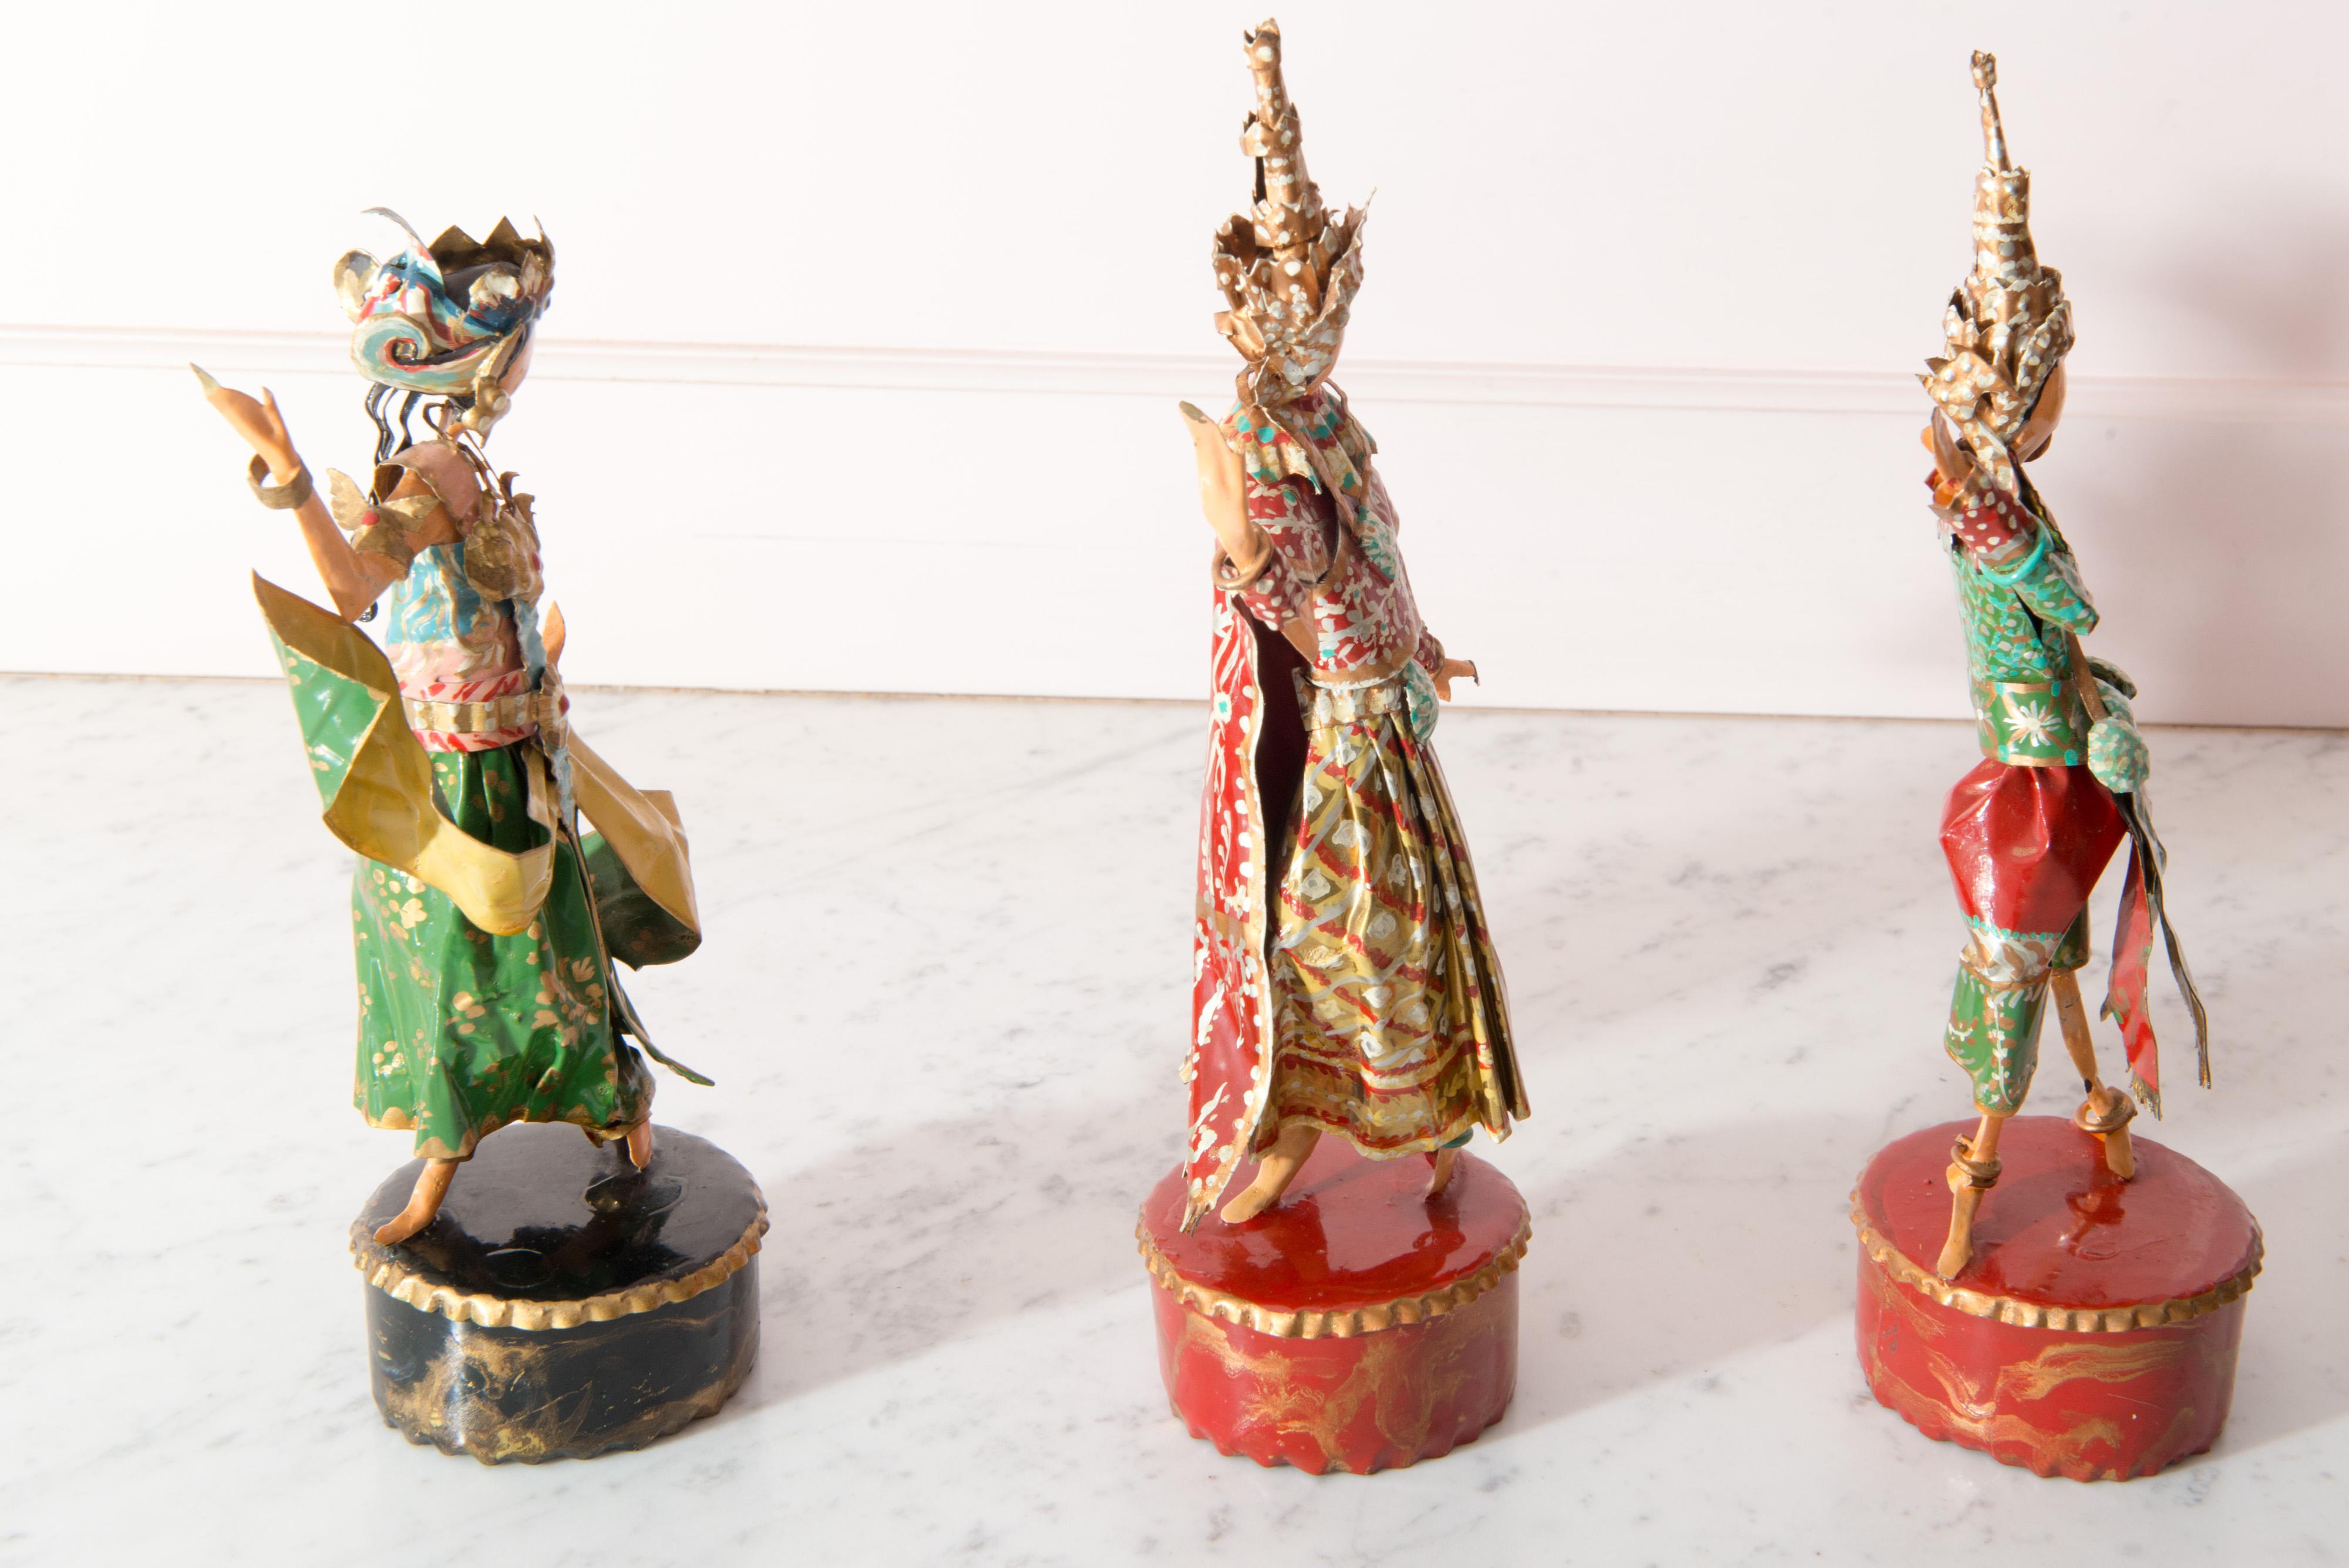 Lee Menichetti, (1931 - 1997) Palm Beach & New York, well known mid-century artist known for his theatre related art. These sculptures are made of hand bent brass and hand painted sheet brass. Characters from the epic period drama 